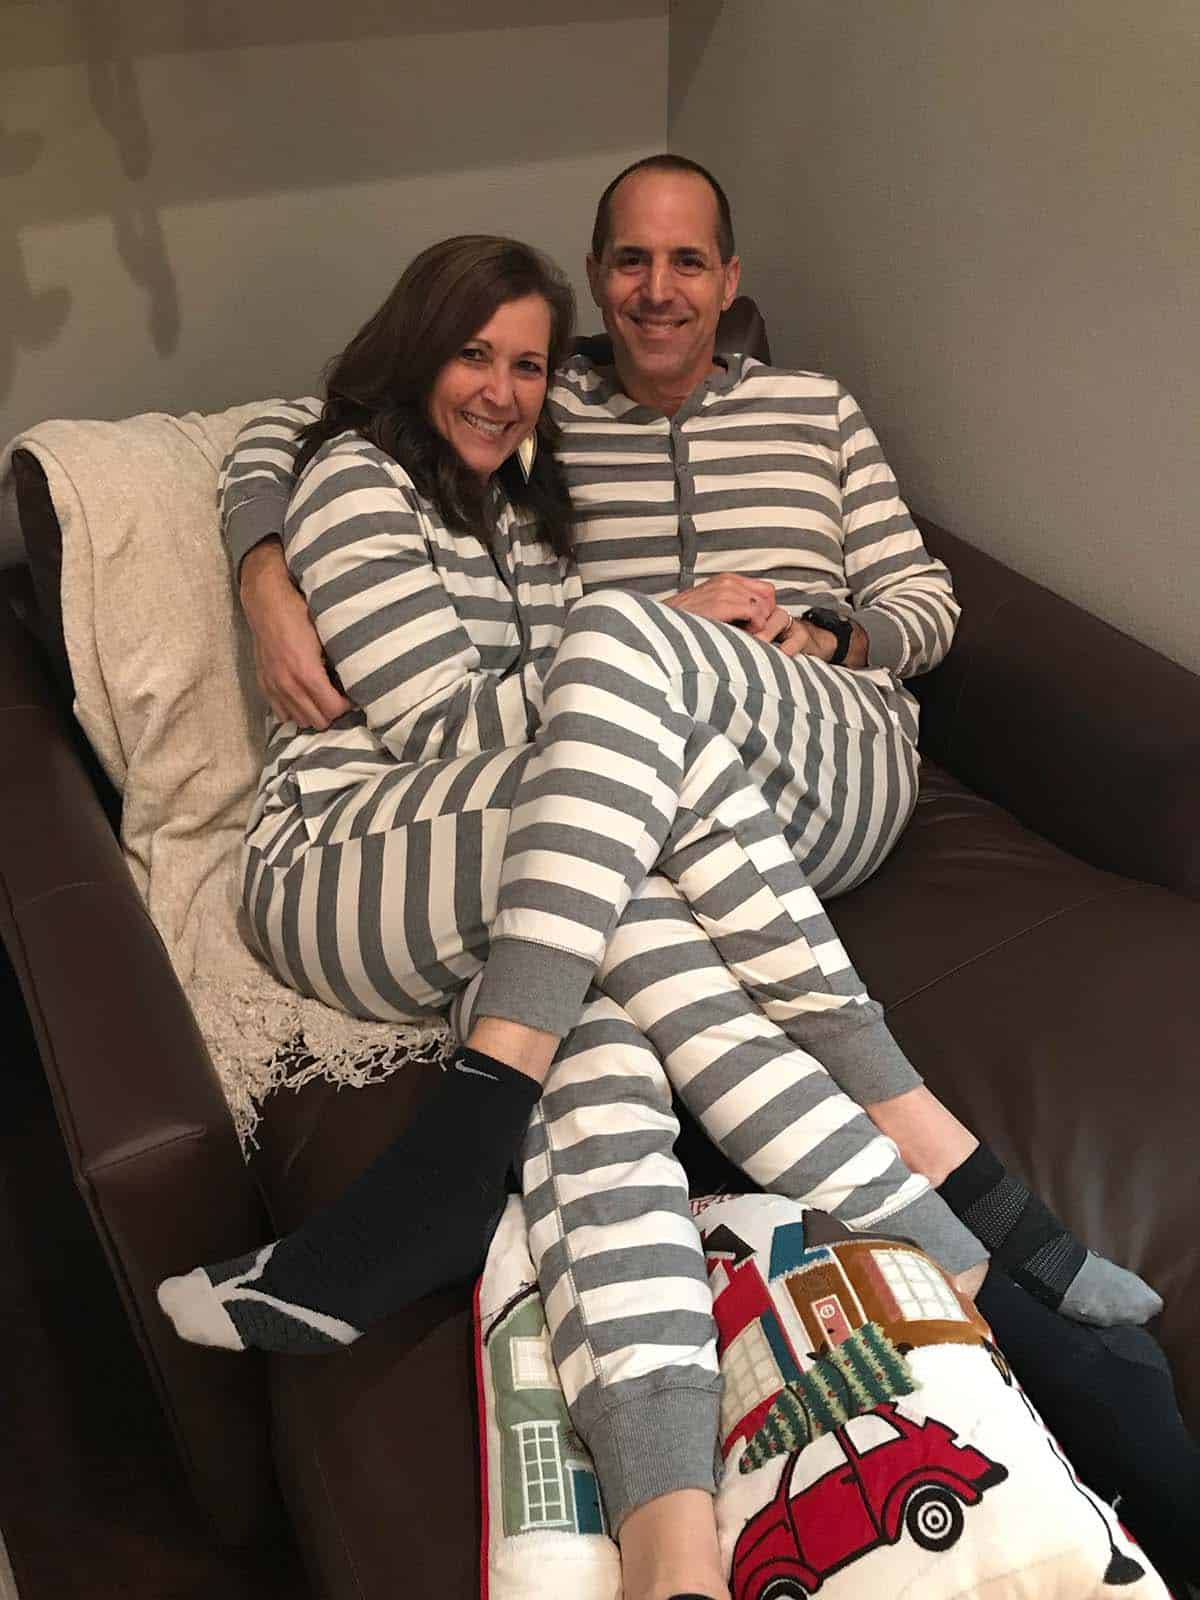 Mike and Sue snuggling in onesies.